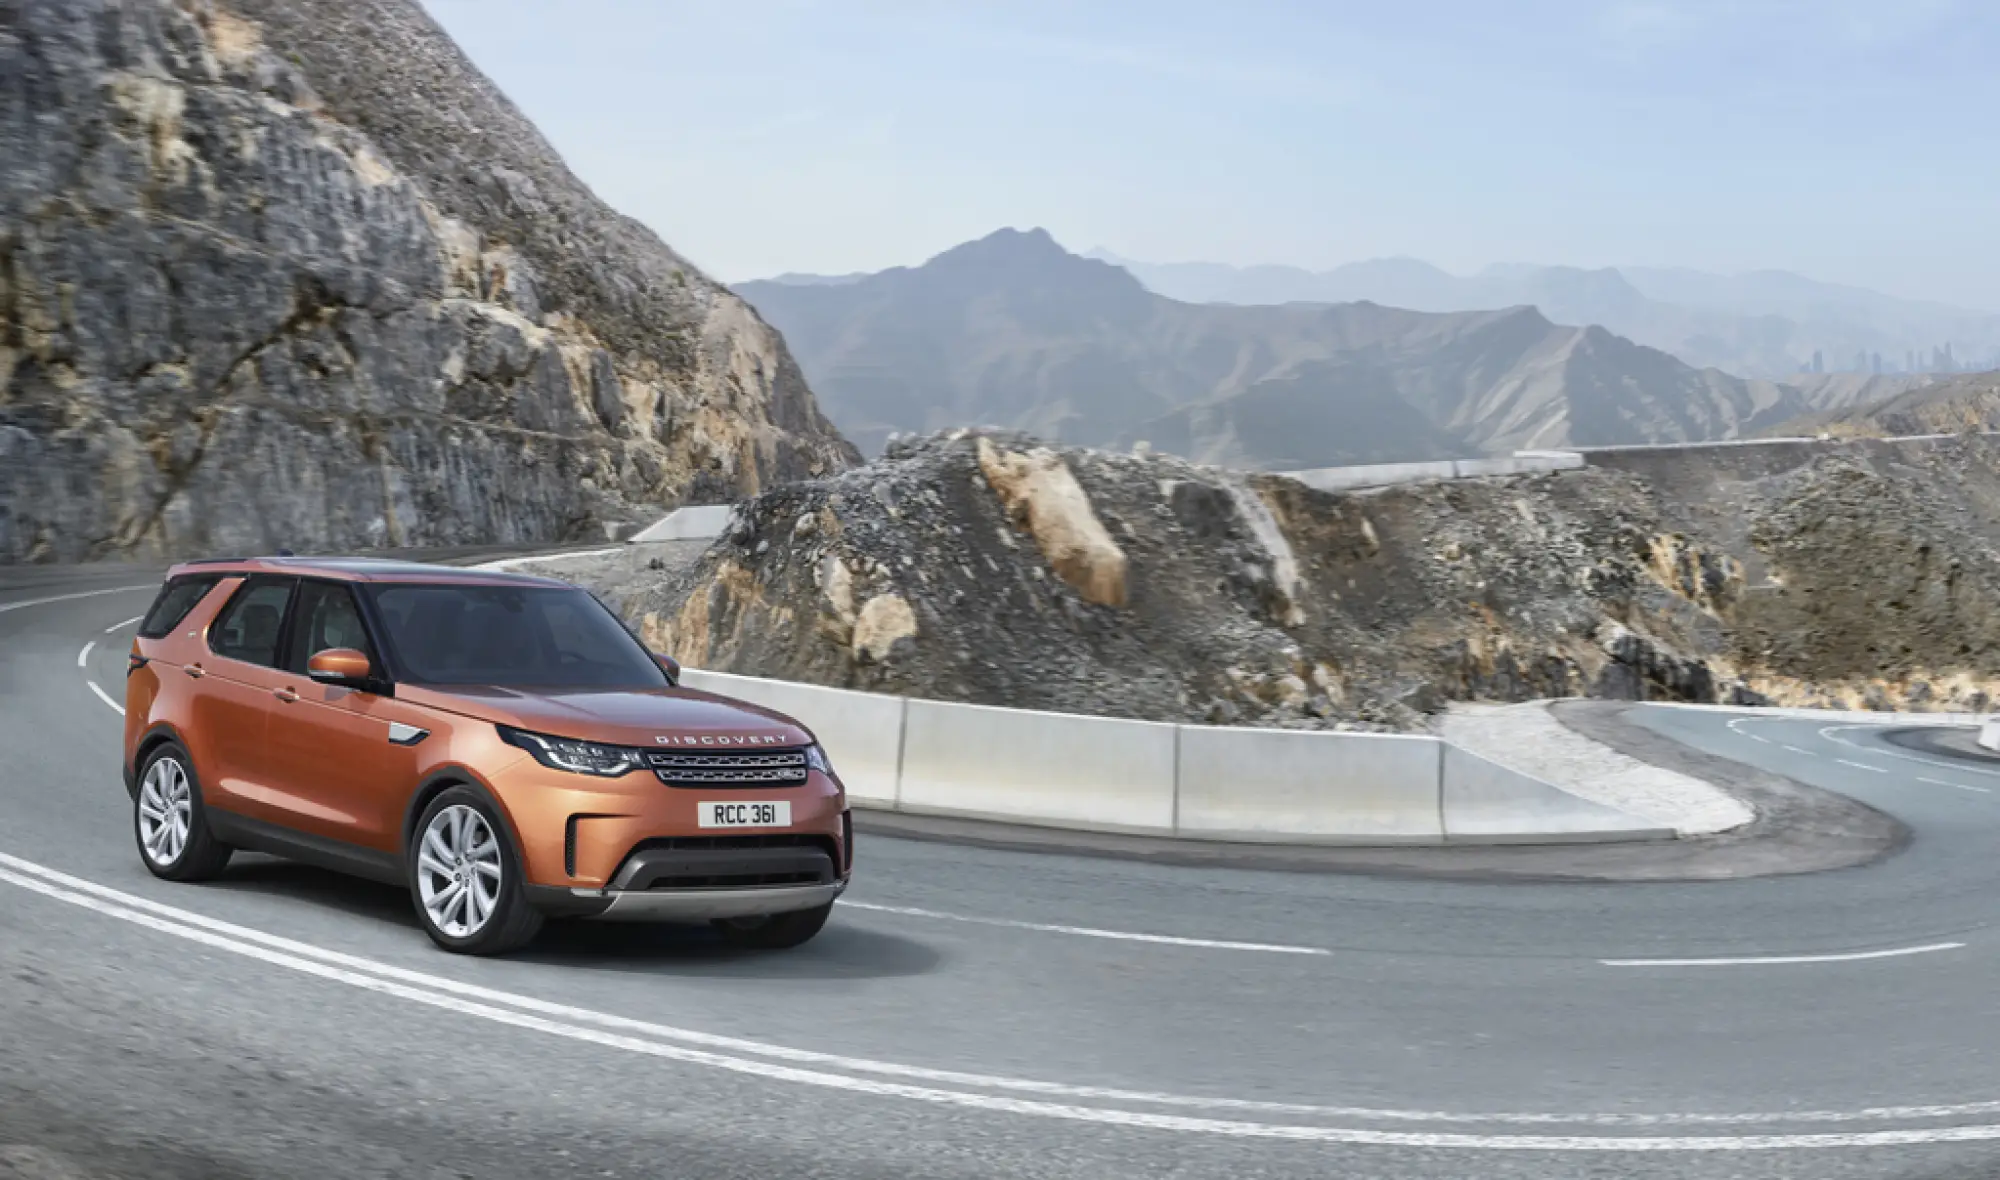 Foto stampa nuova Land Rover Discovery MY 2017 28 settembre 2016 - 16